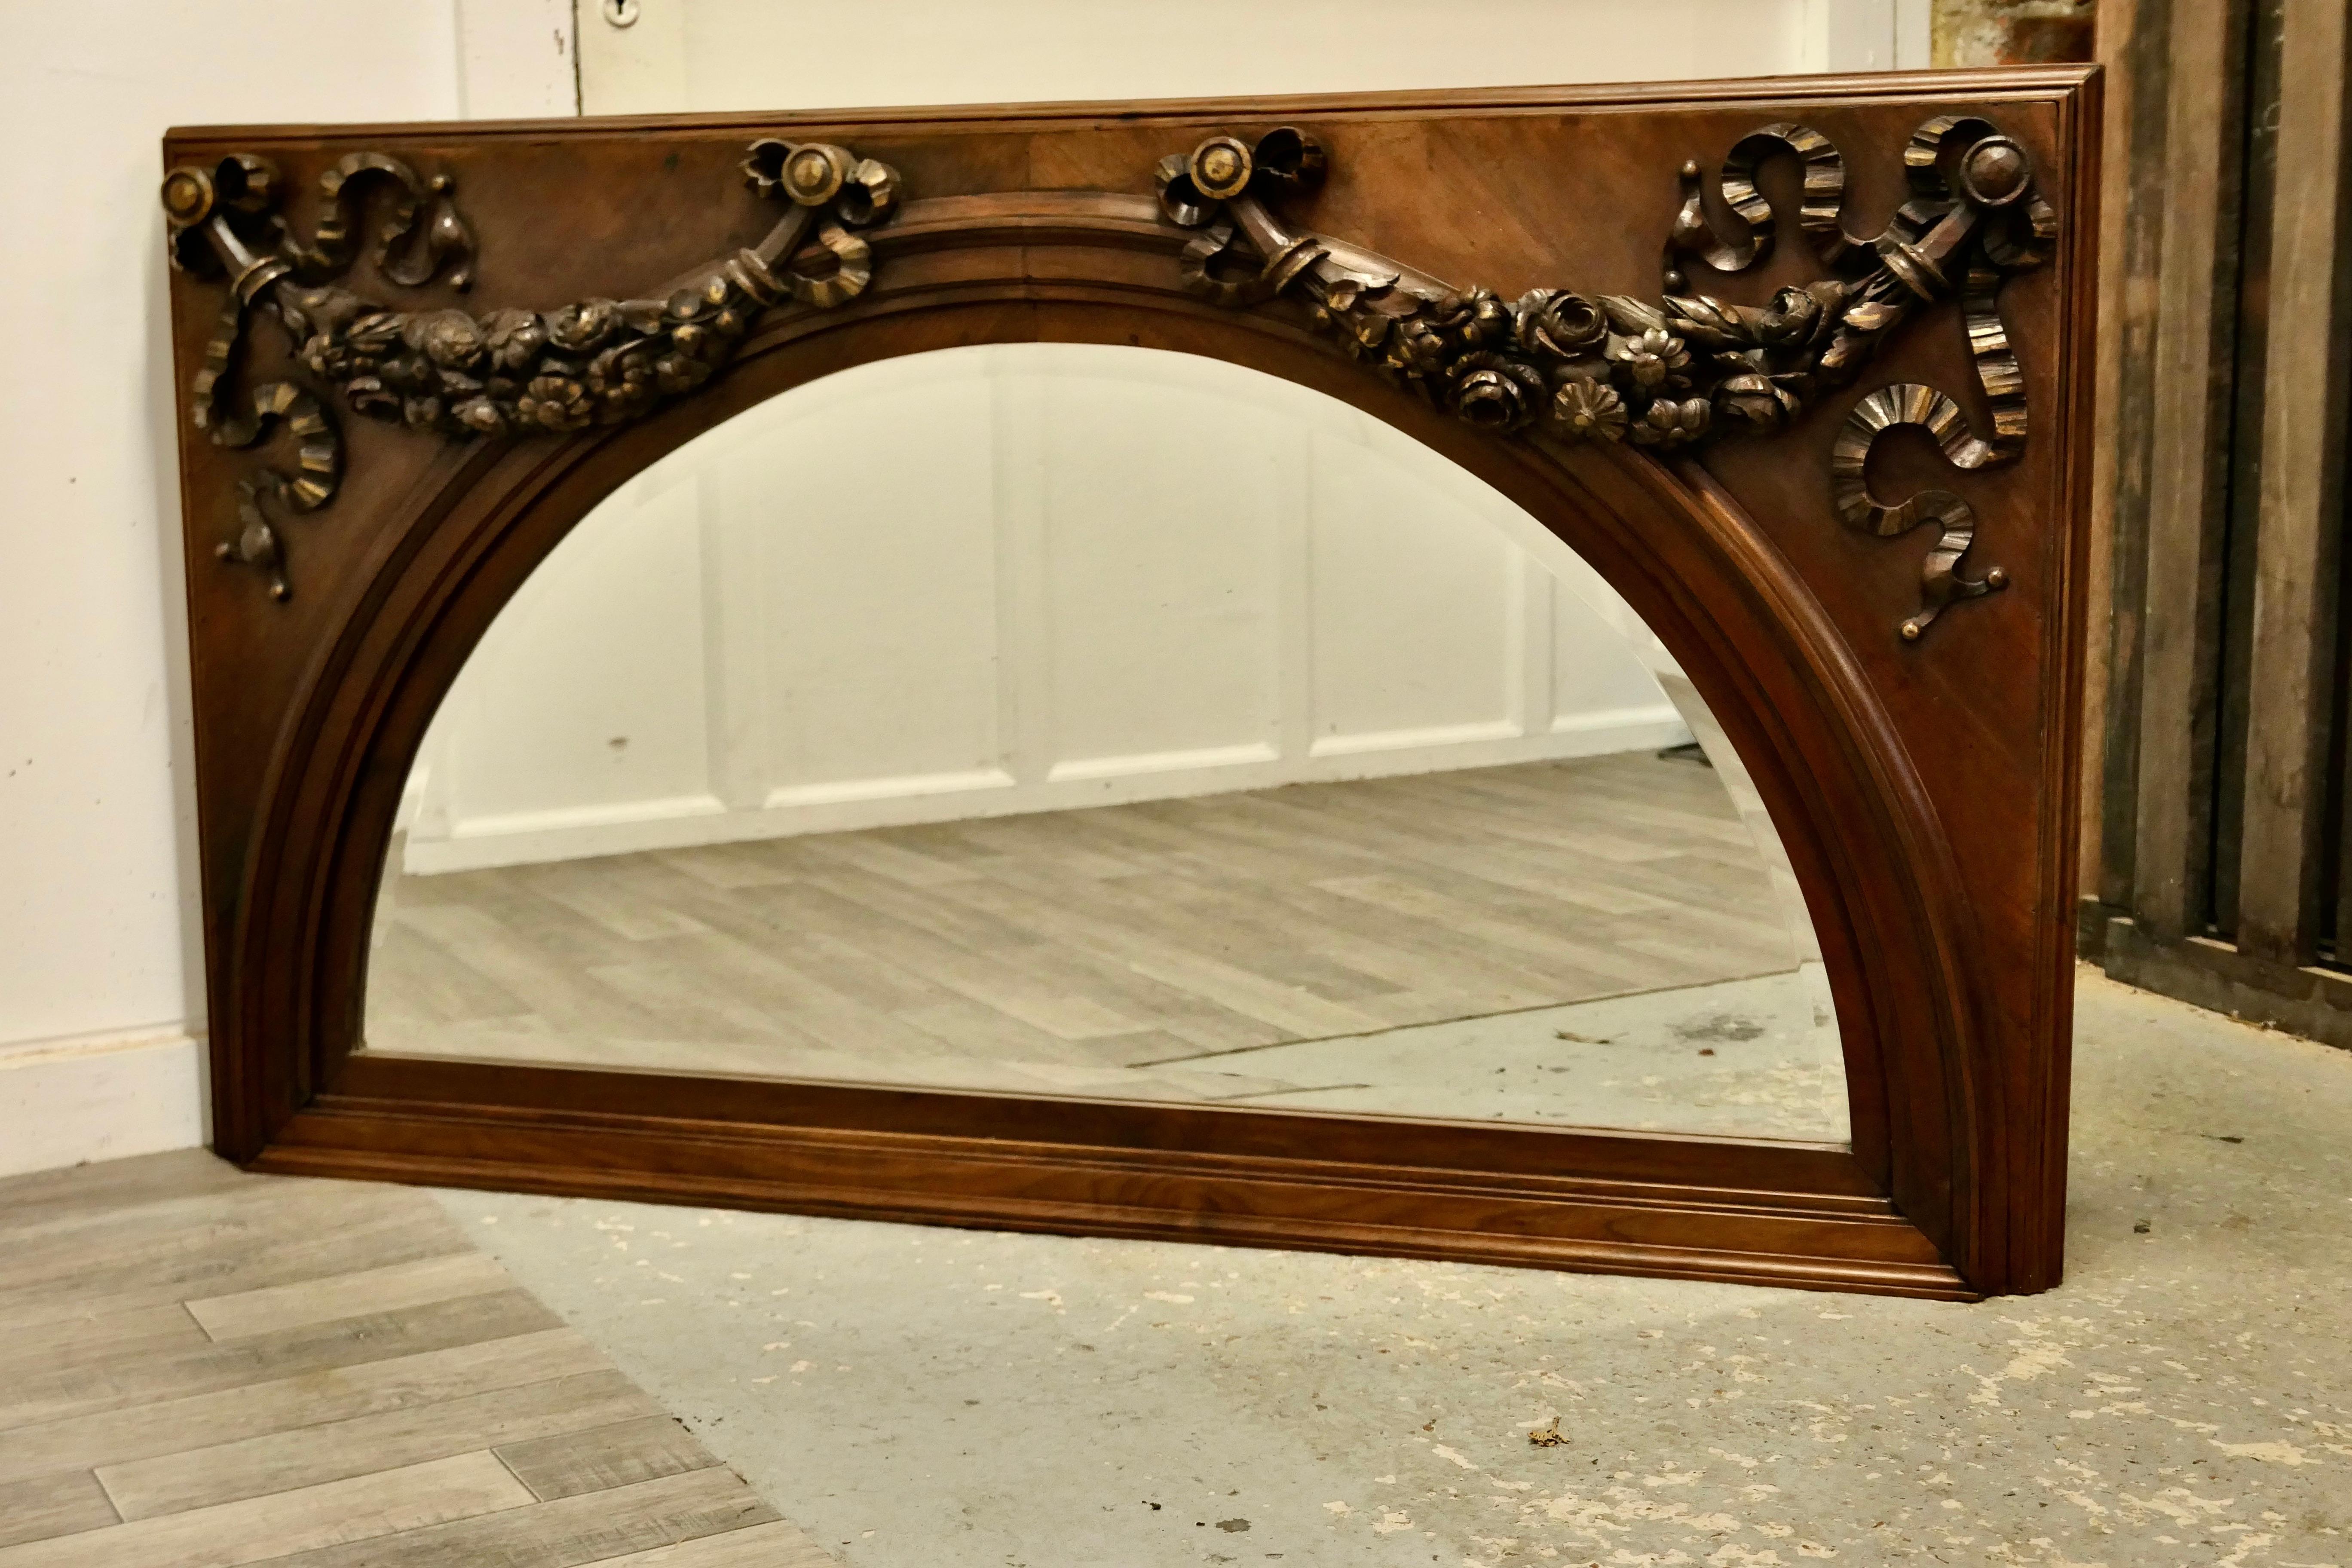 A Superb Large Carved Walnut Over mantel Mirror
This is a very Striking piece it has a rectangular shape set with an arched beveled mirror, there are deeply carved swags with garlands of flowers and ribbons decorating the top corners
The mirror has